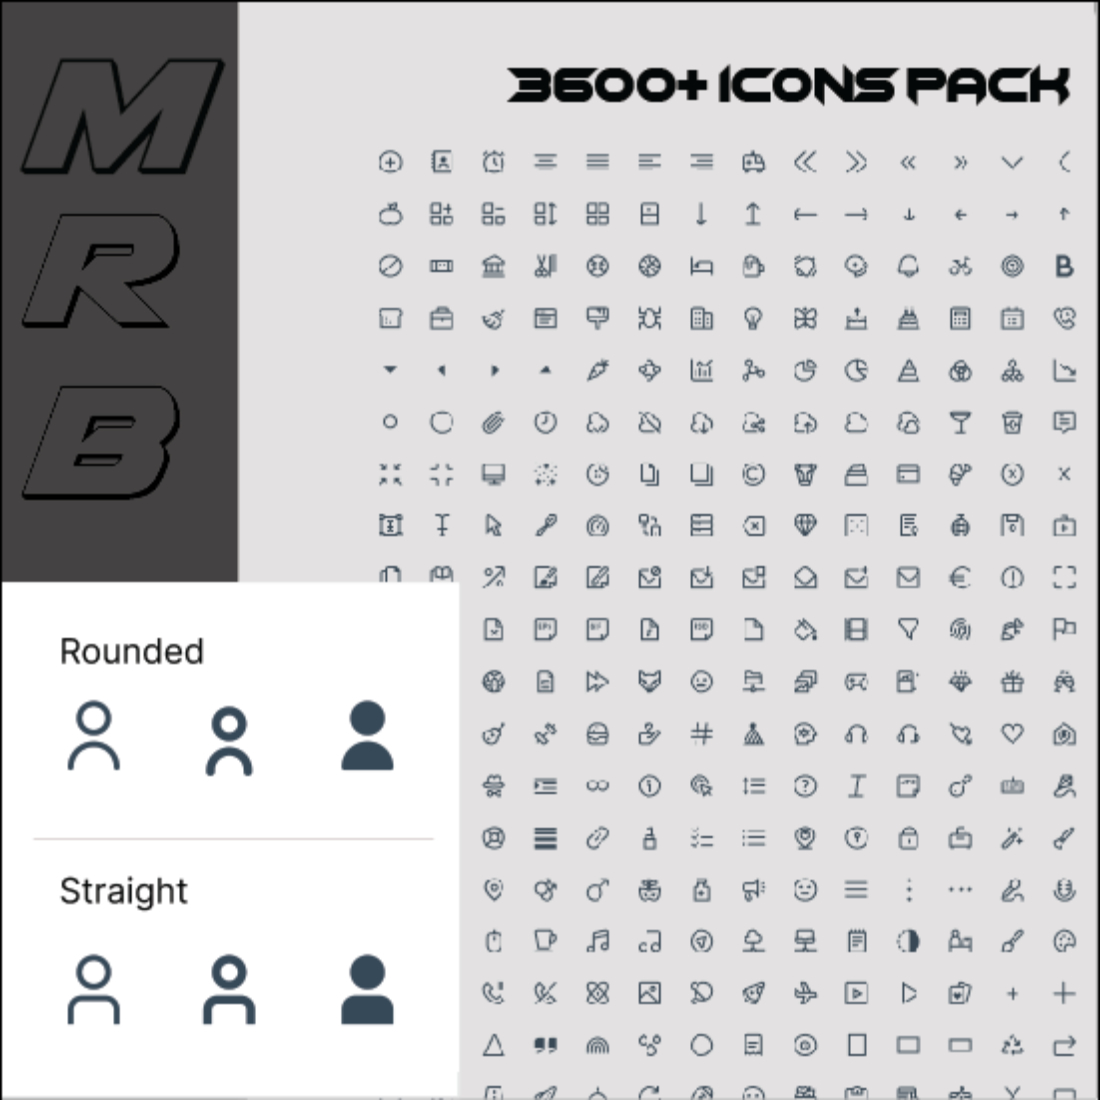 3600+ SVG Icons Pack for Your Design cover image.